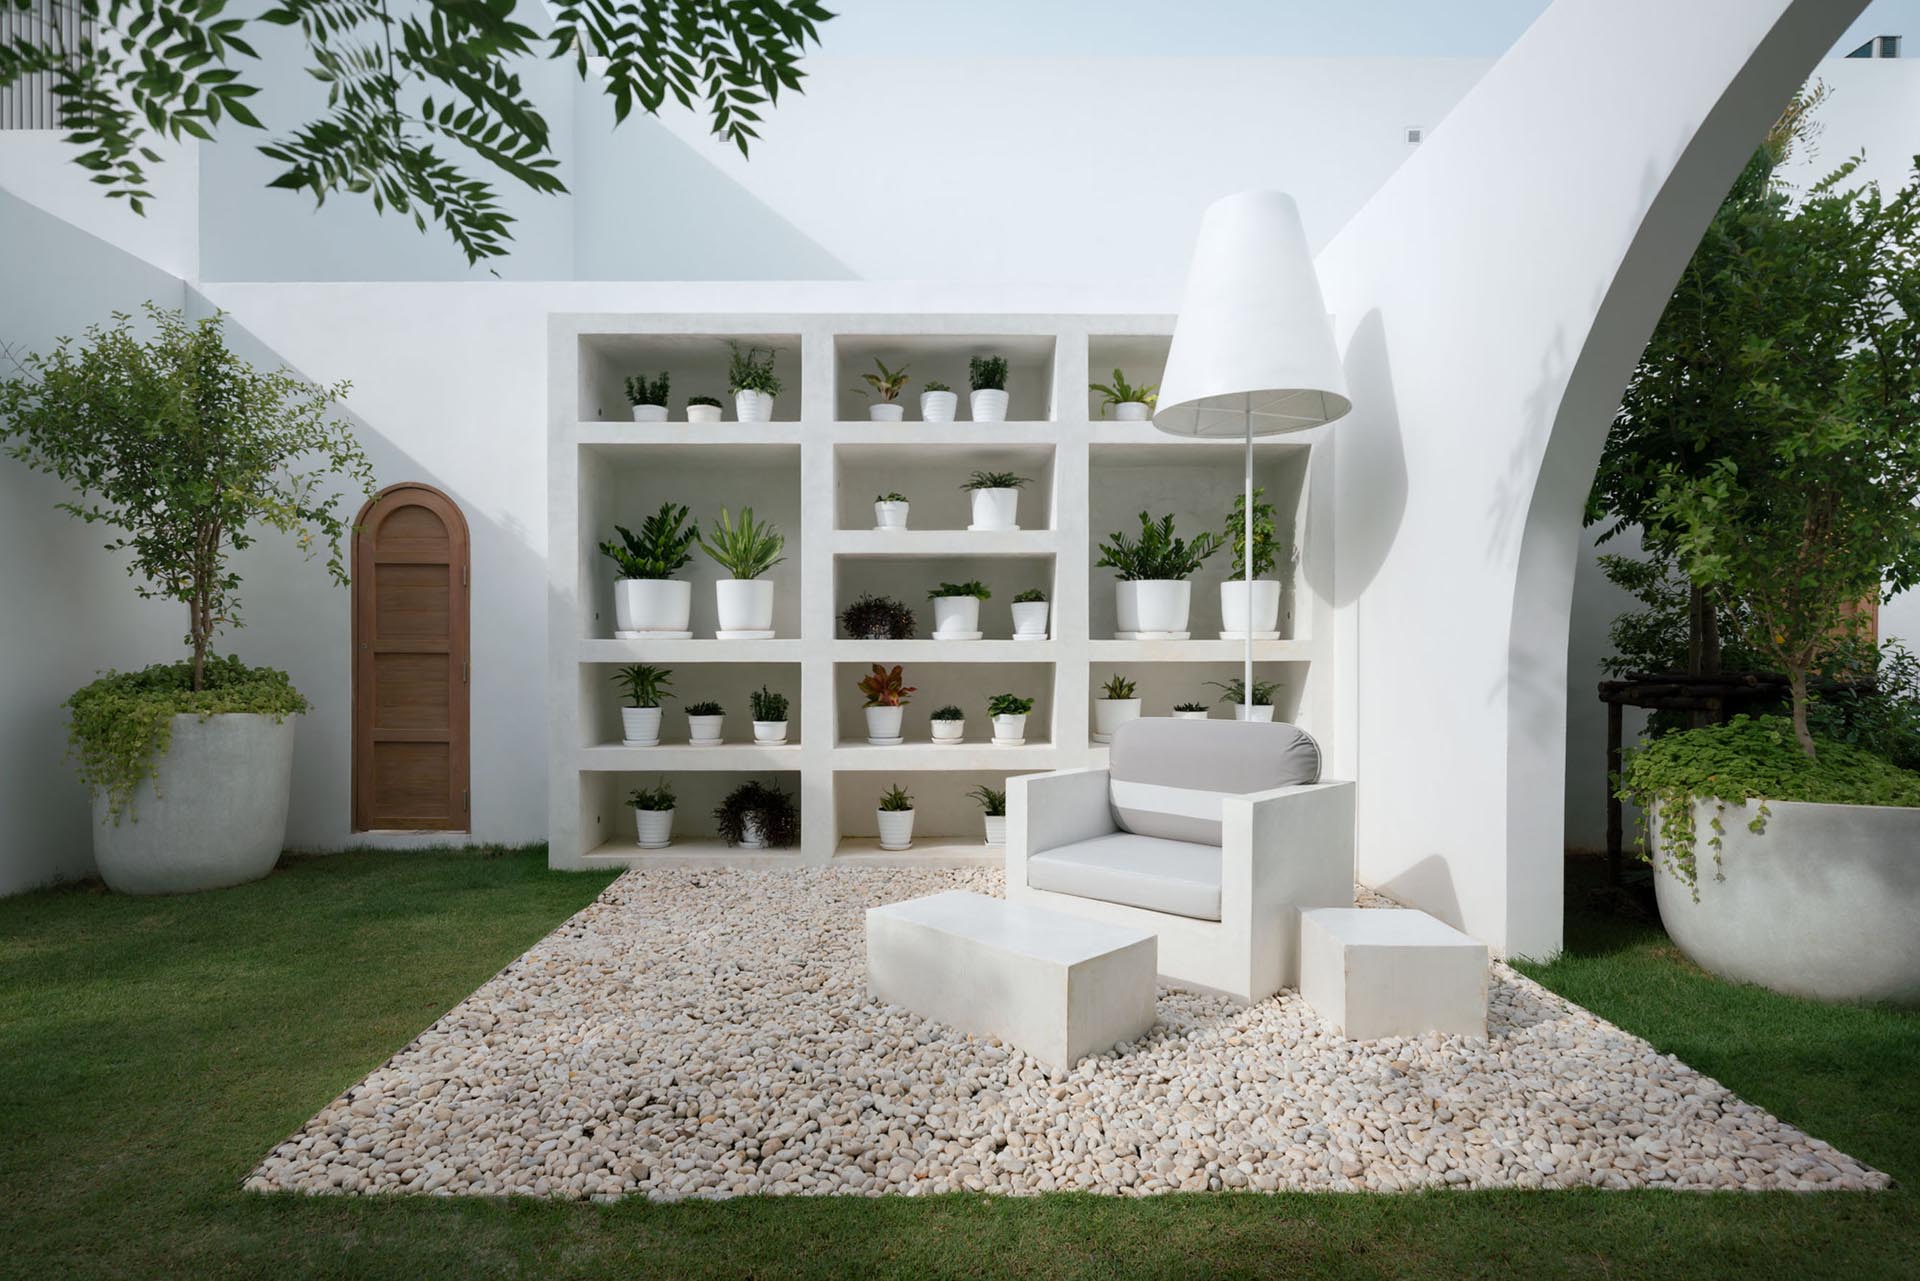 An outdoor living room with a shelving unit designed to house plants.